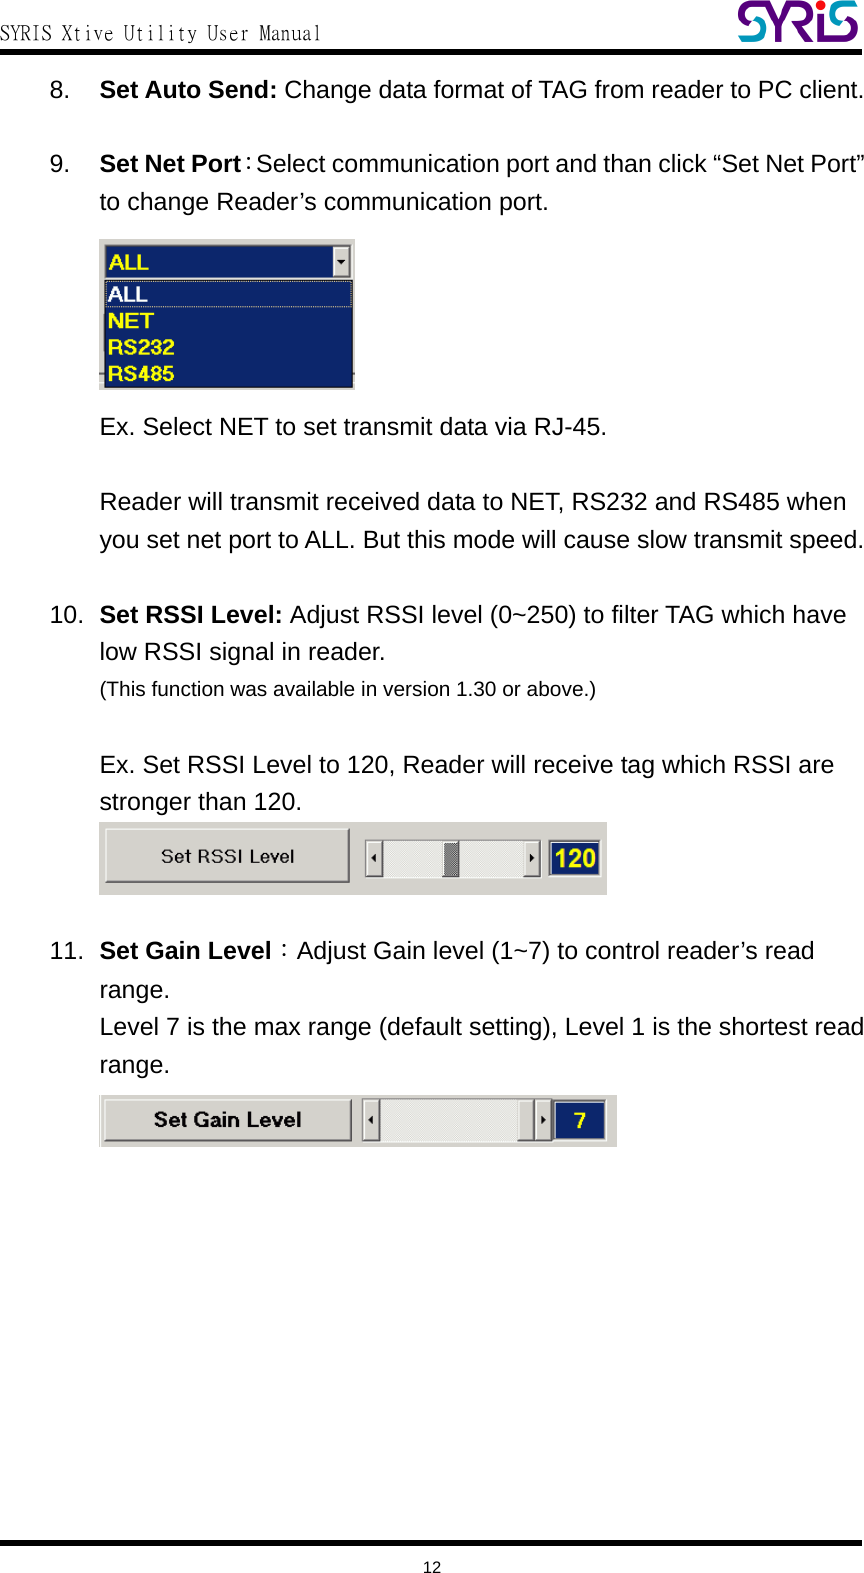  SYRIS Xtive Utility User Manual  8.  Set Auto Send: Change data format of TAG from reader to PC client.  9.  Set Net Port：Select communication port and than click “Set Net Port” to change Reader’s communication port.  Ex. Select NET to set transmit data via RJ-45.    Reader will transmit received data to NET, RS232 and RS485 when you set net port to ALL. But this mode will cause slow transmit speed.  10.  Set RSSI Level: Adjust RSSI level (0~250) to filter TAG which have low RSSI signal in reader. (This function was available in version 1.30 or above.)  Ex. Set RSSI Level to 120, Reader will receive tag which RSSI are stronger than 120.   11.  Set Gain Level：Adjust Gain level (1~7) to control reader’s read range. Level 7 is the max range (default setting), Level 1 is the shortest read range.      12 